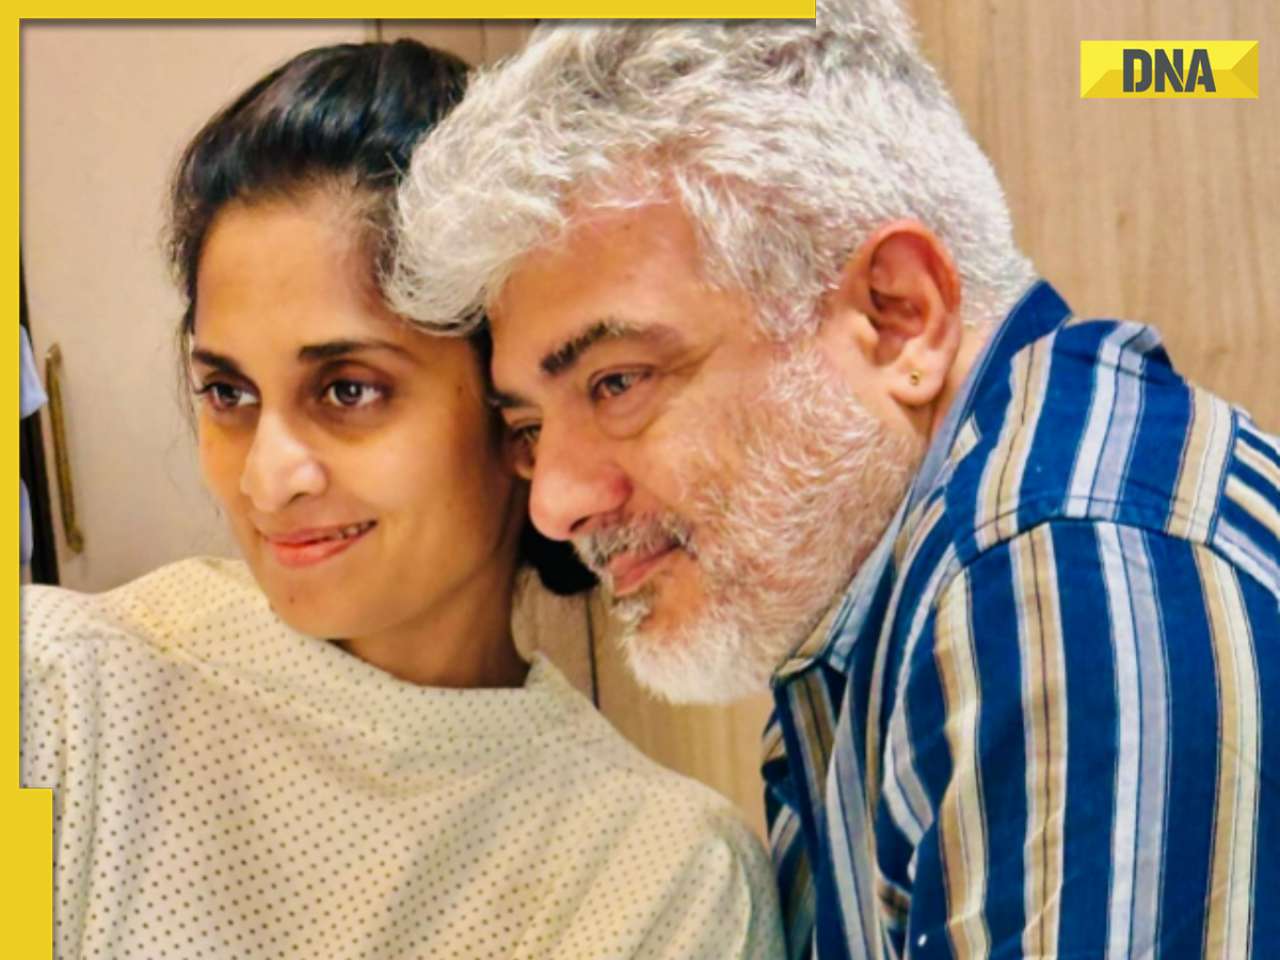 Shalini holds hands with Ajith Kumar in their latest photo from hospital, worried fans say 'get well soon'